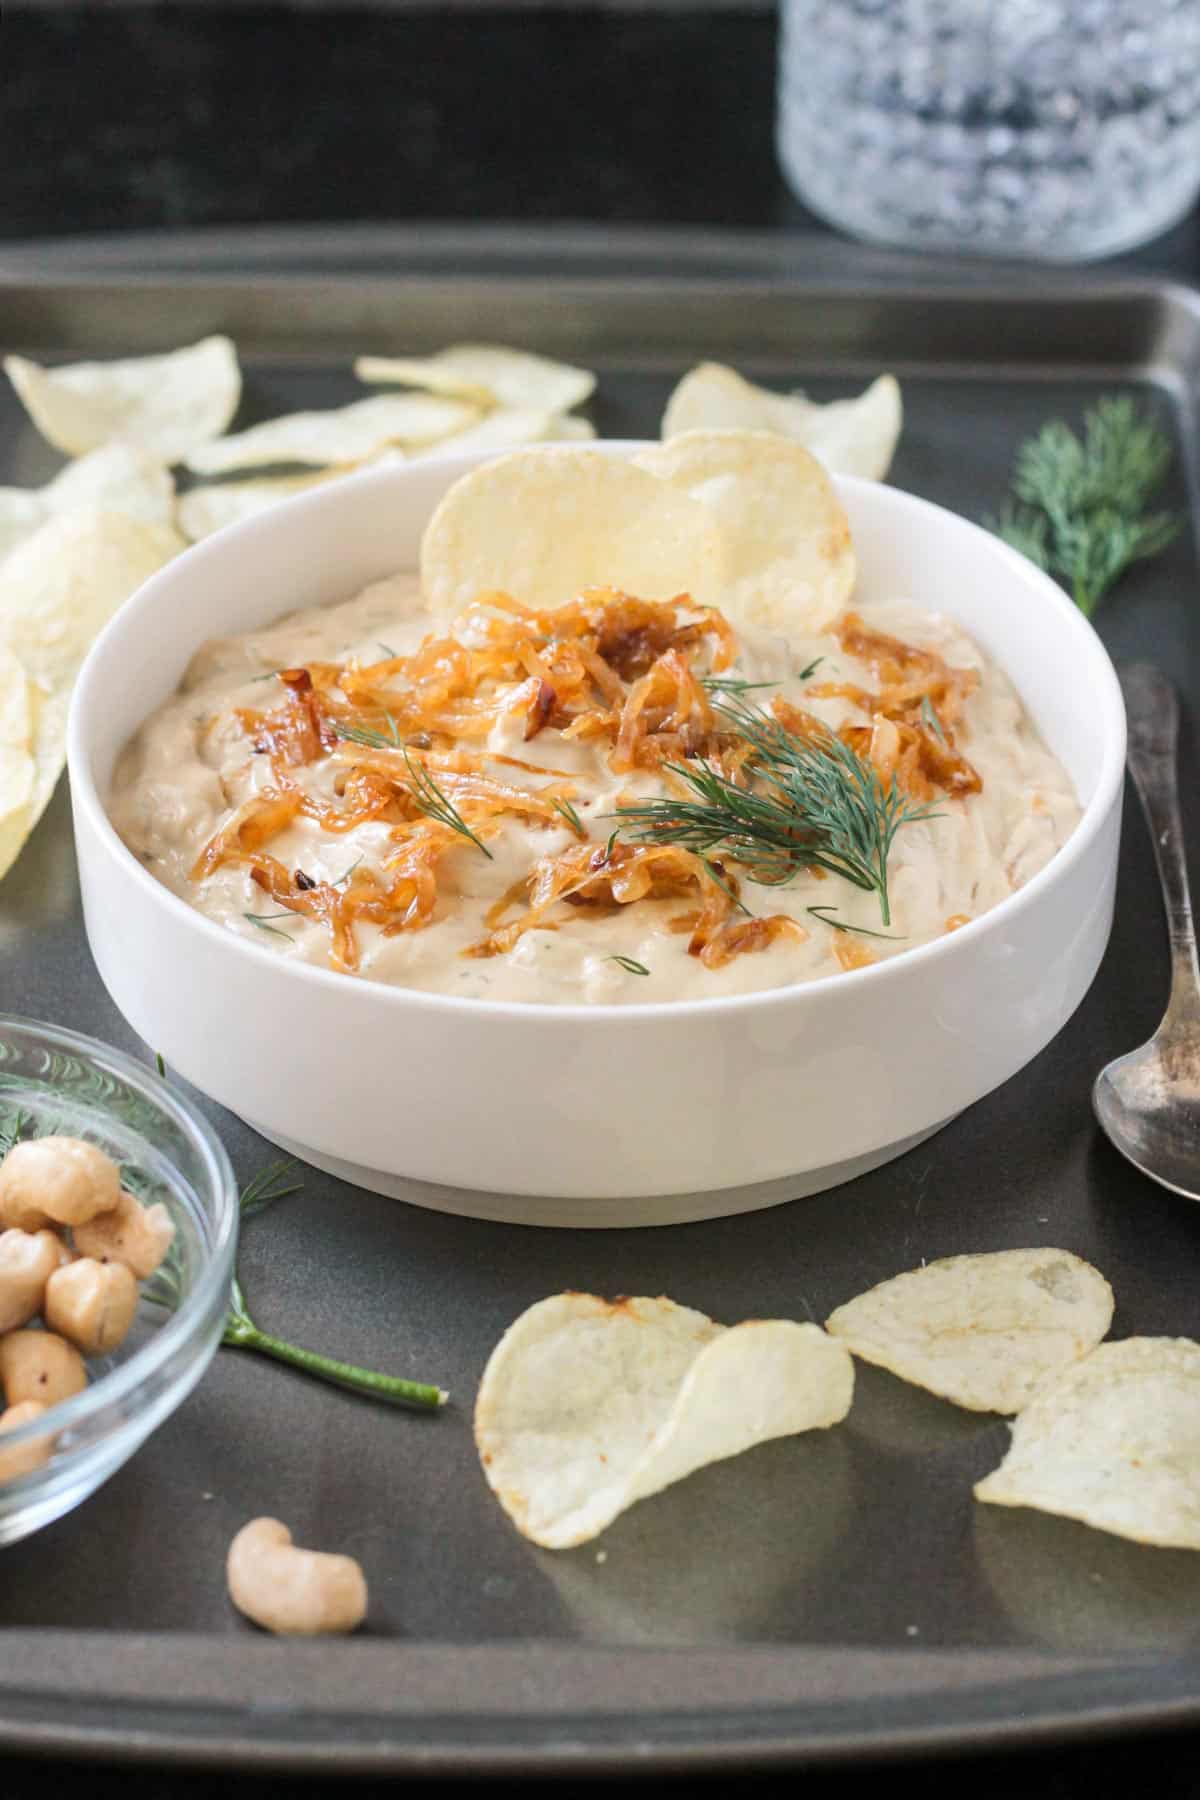 Bowl of caramelized onion dip on a tray with potato chips.